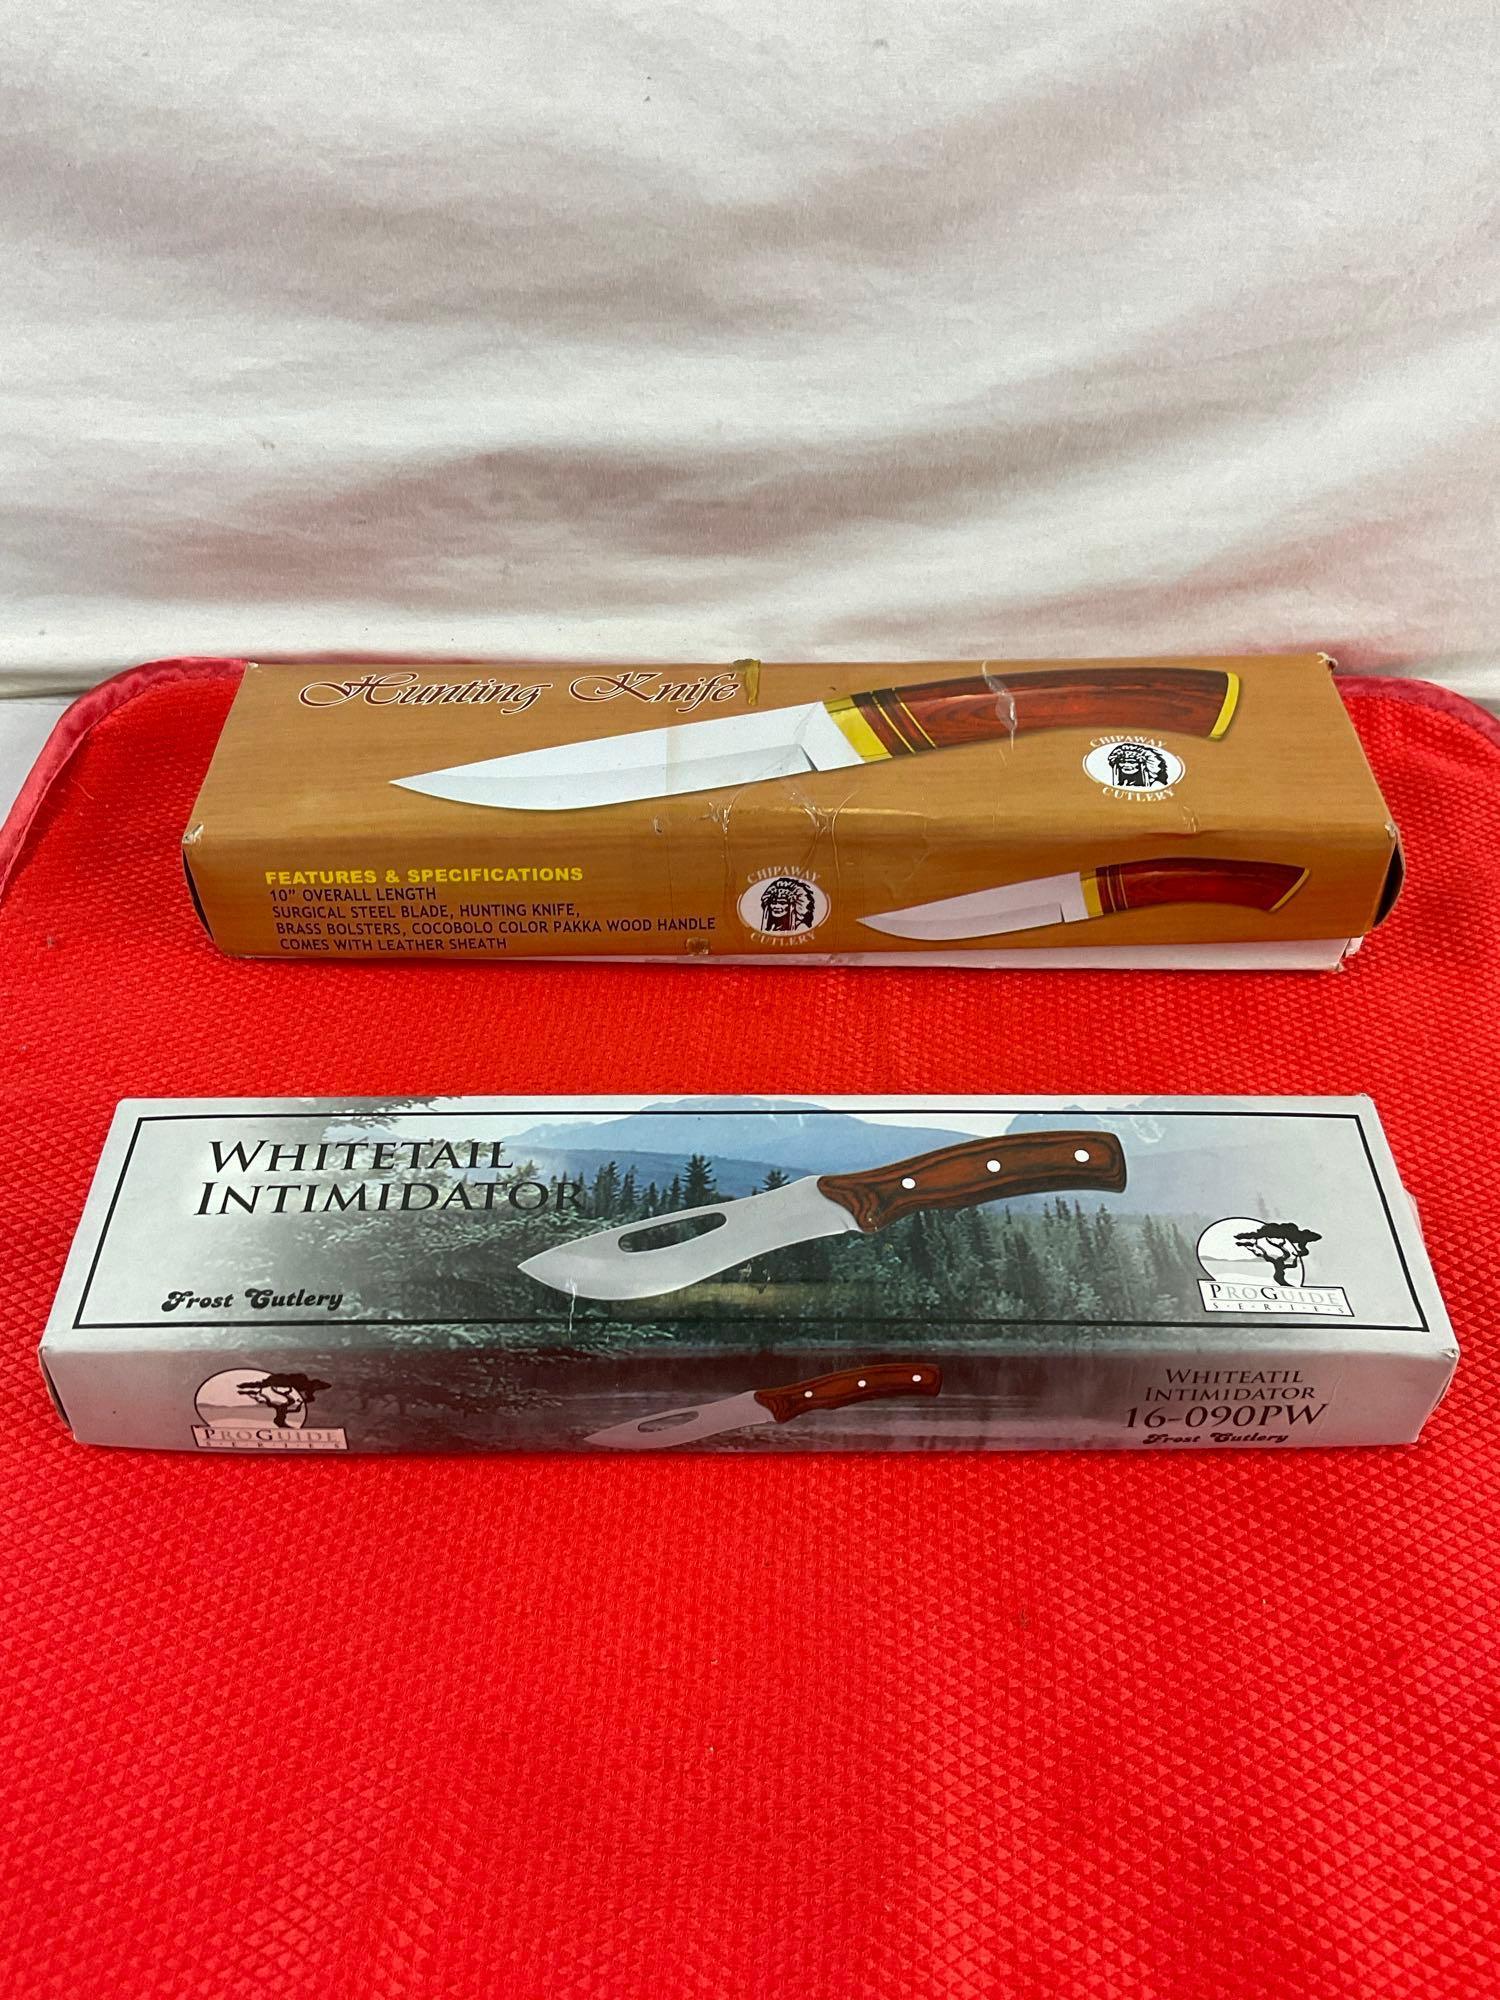 2 pcs Stainless Steel Hunting Knives w/ Sheathes. Chipaway 10" Knife & Frost 9" Knife. NIB. See